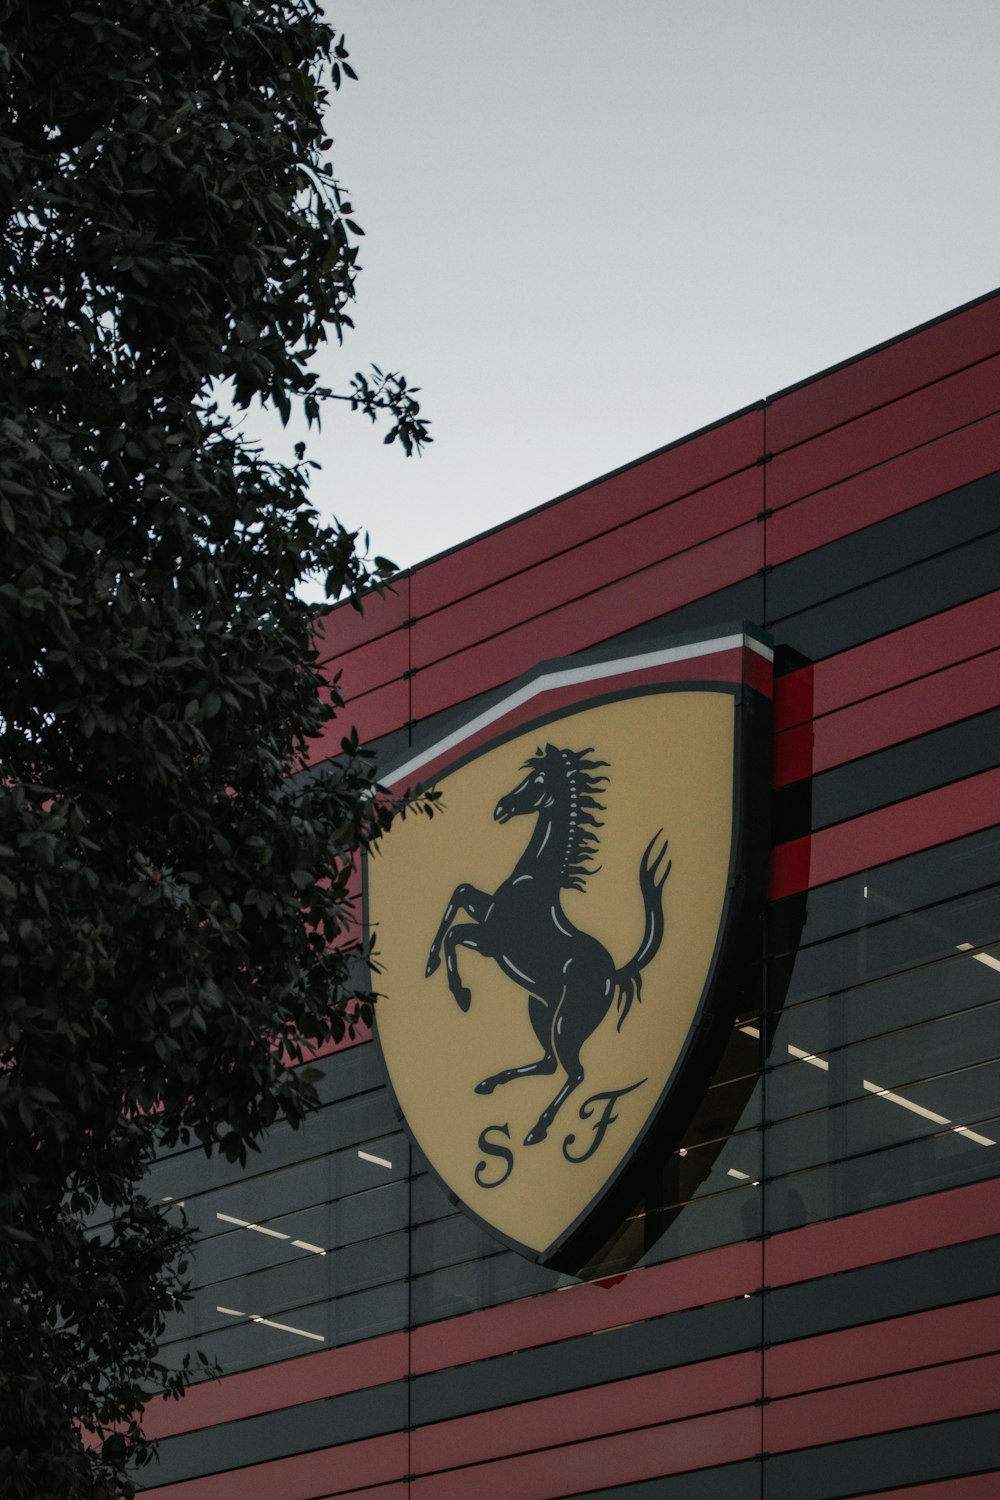 a ferrari logo on the side of a building